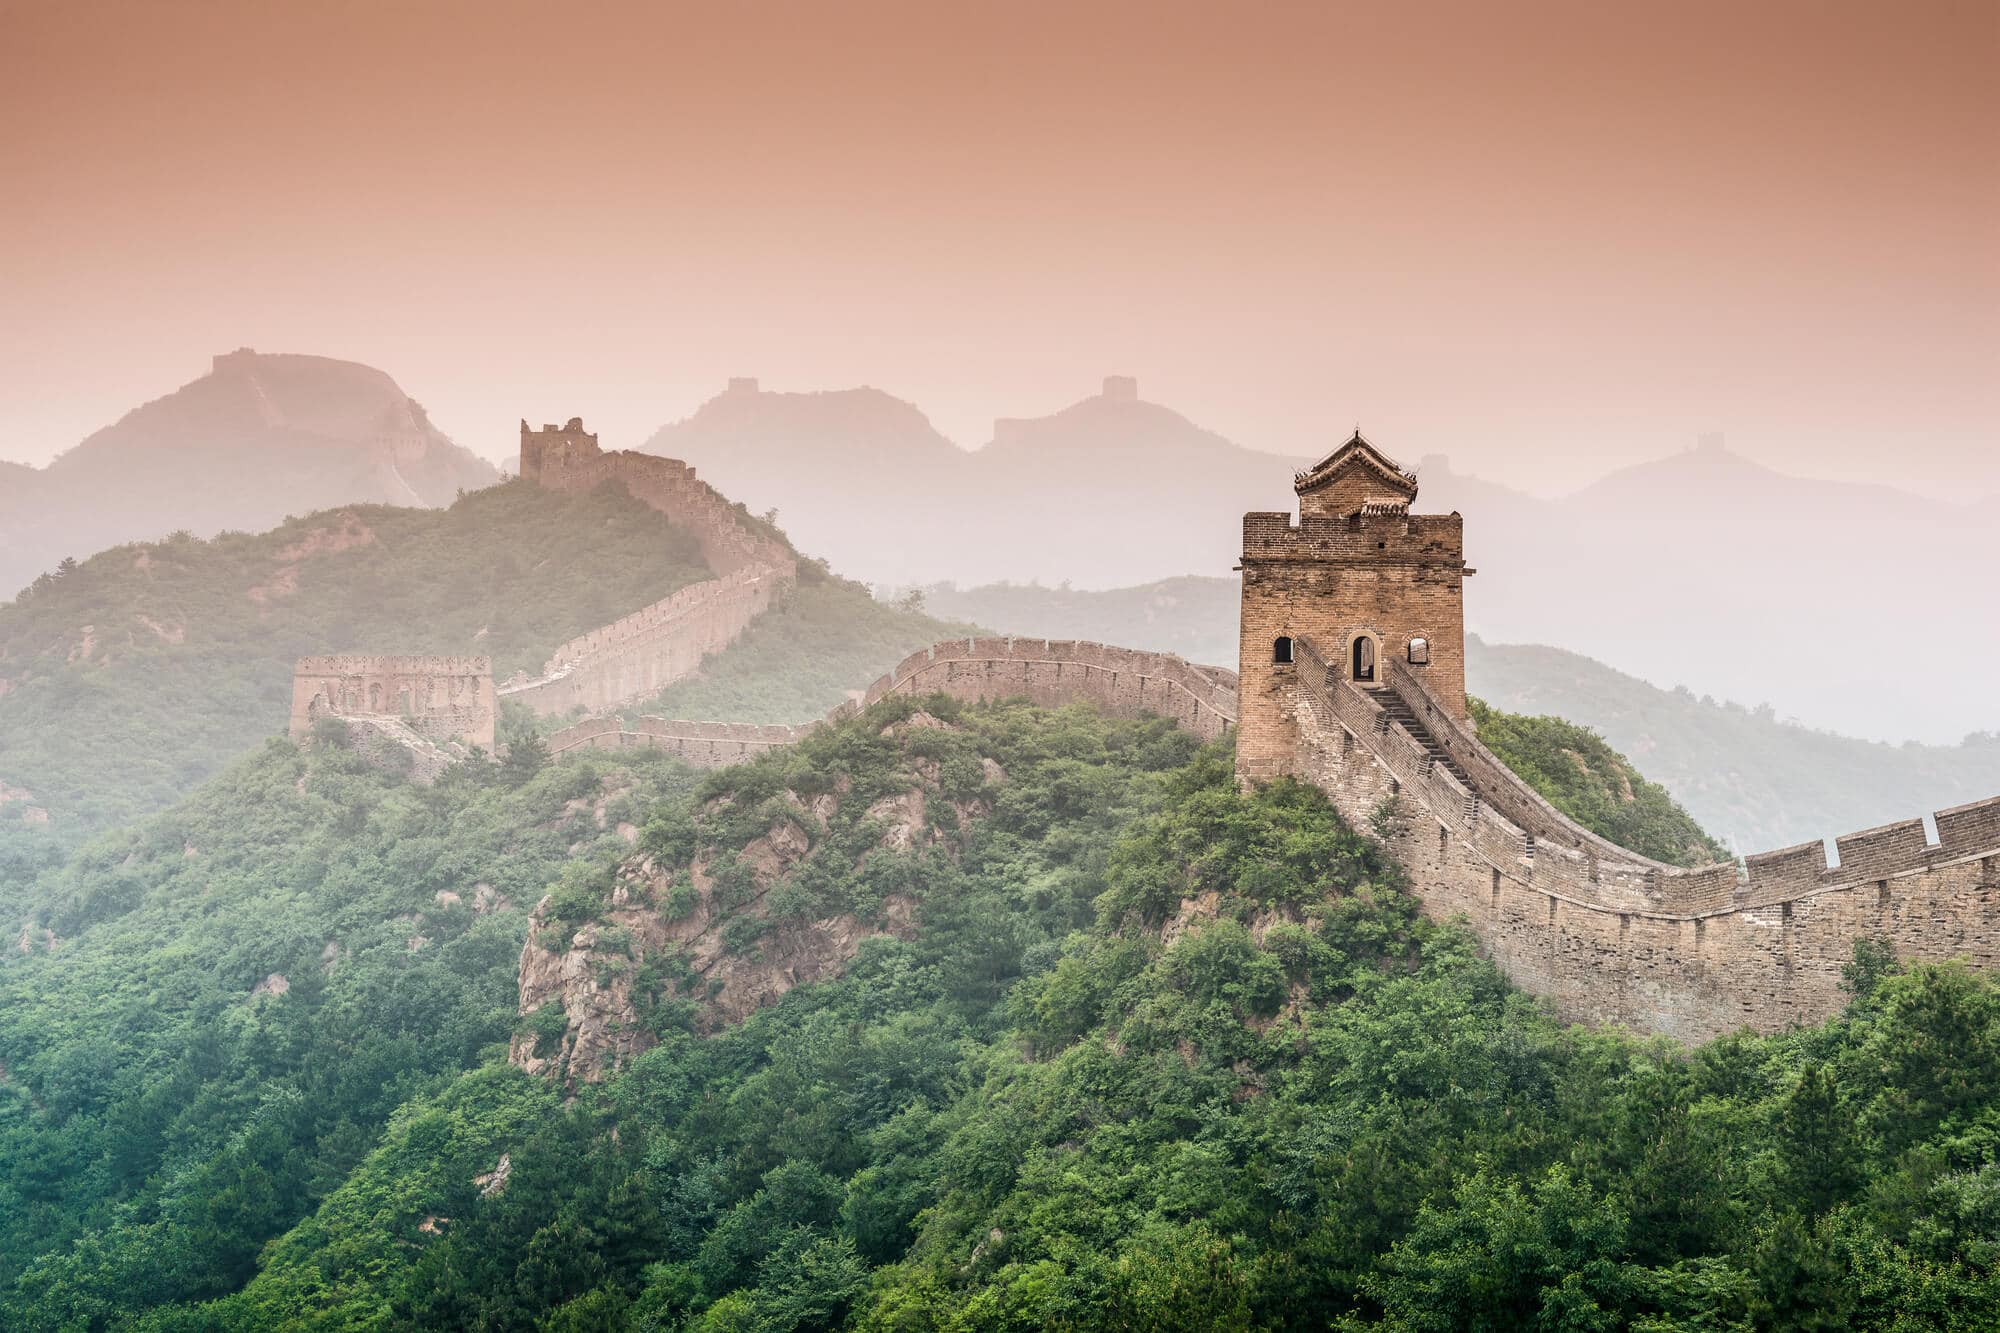 Travel bloggers reveal their favorite unforgettable travel experiences in the world - The Great Wall of China